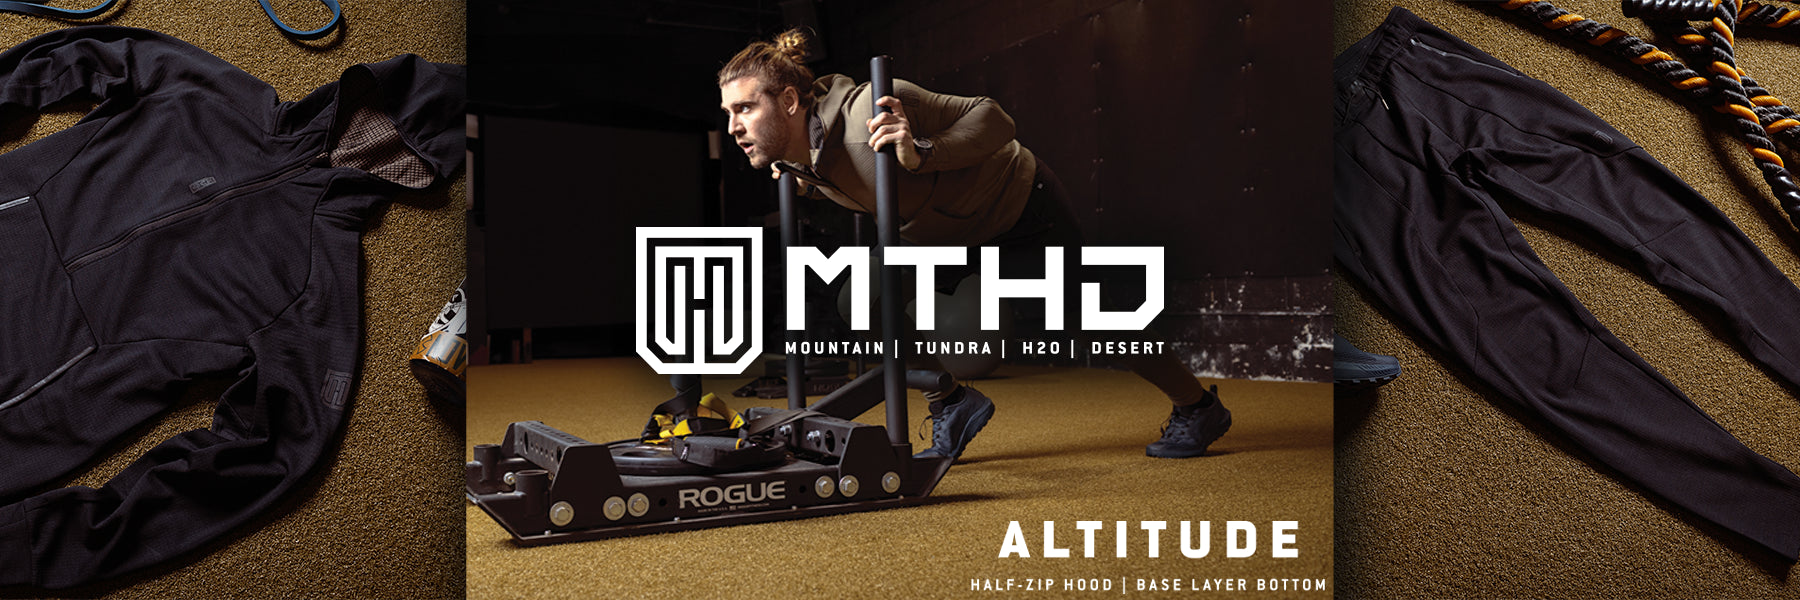 MTHD ALTITUDE JACKET AND PANTS